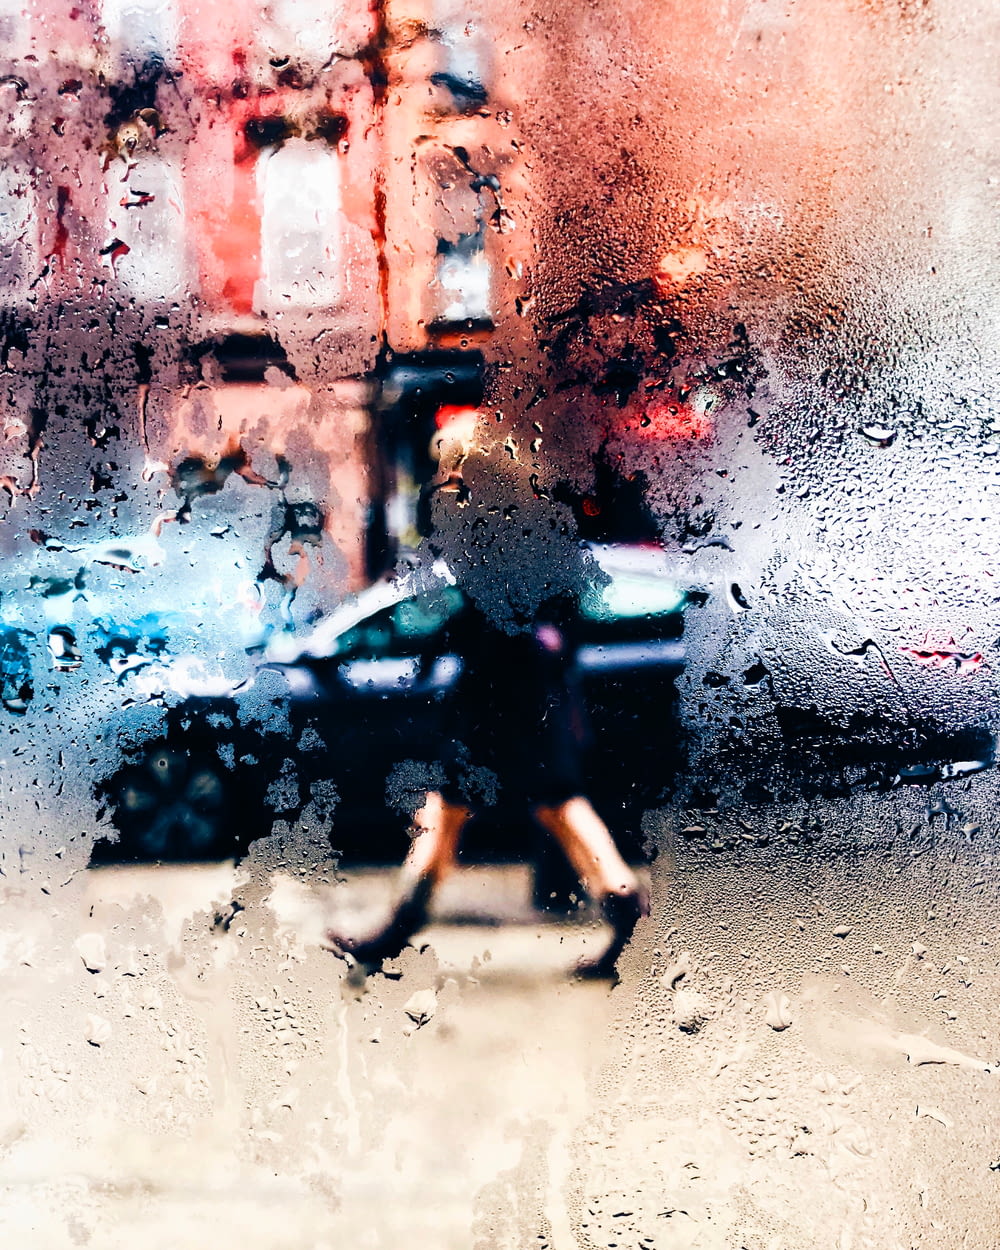 a blurry photo of a person walking in the rain